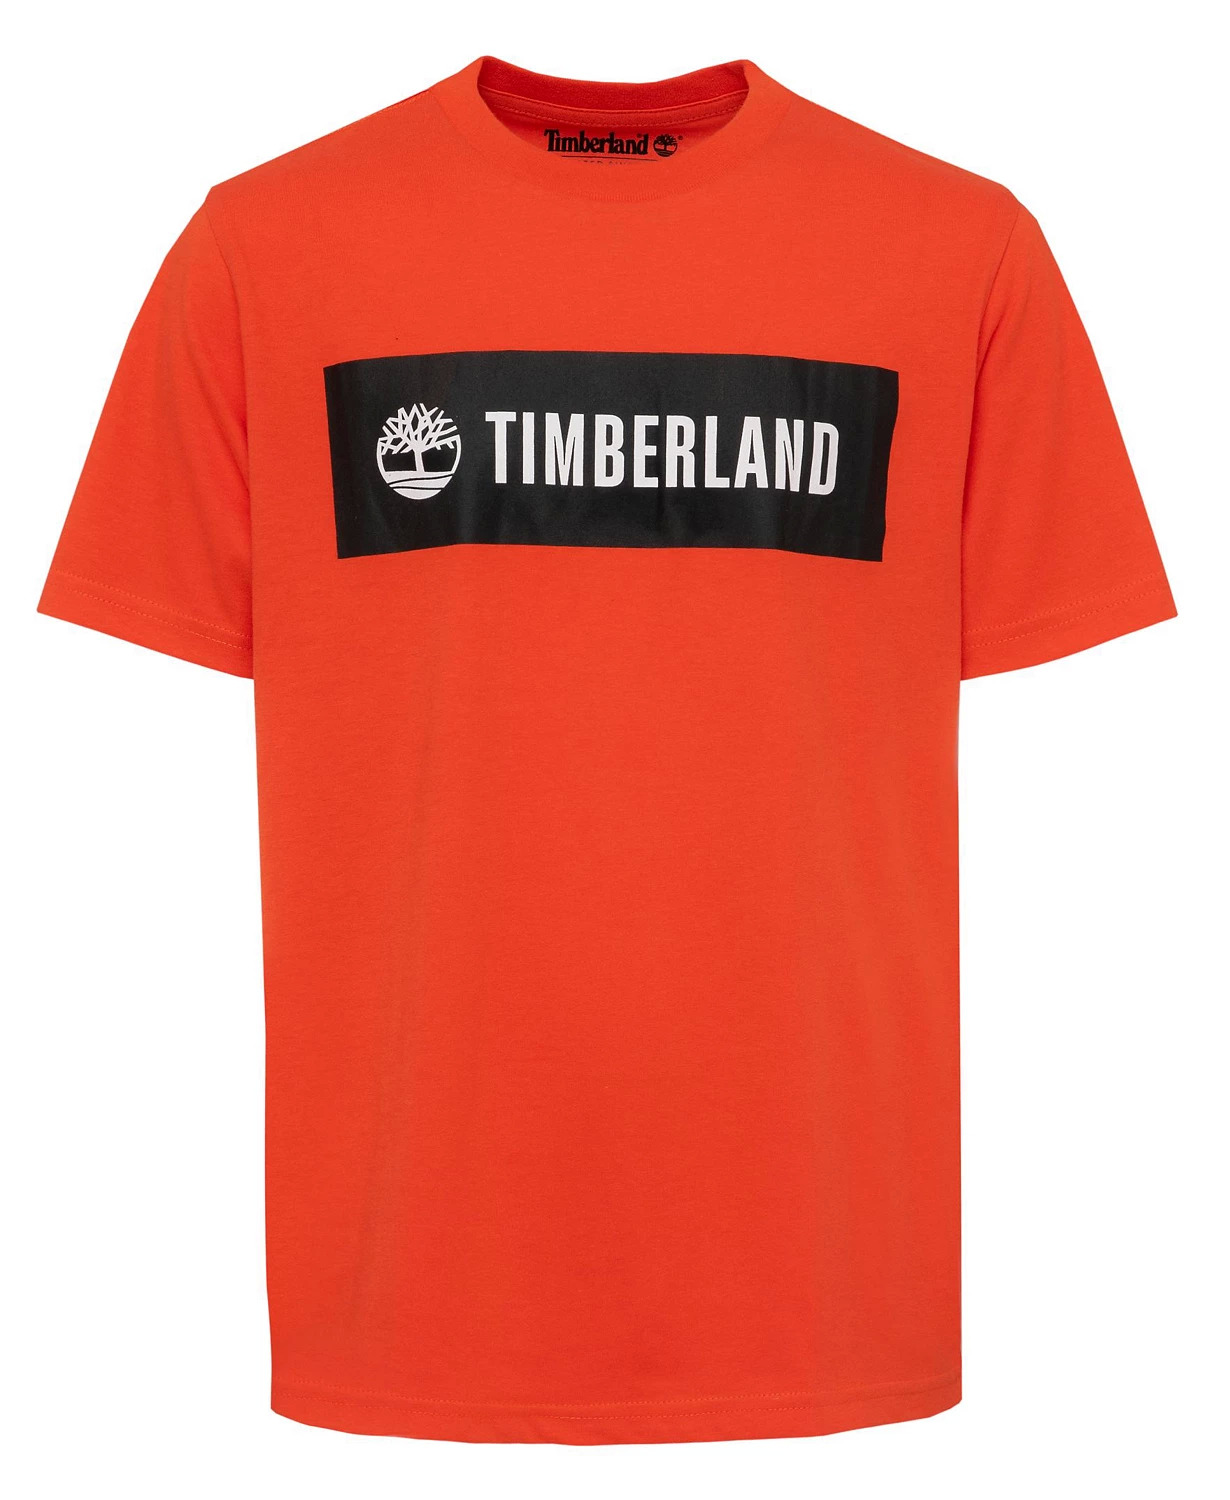 Timberland Boys' T-Shirt (various) $5.93 & More + SD Cashback + Free Store Pickup at Macy's or FS on $25+